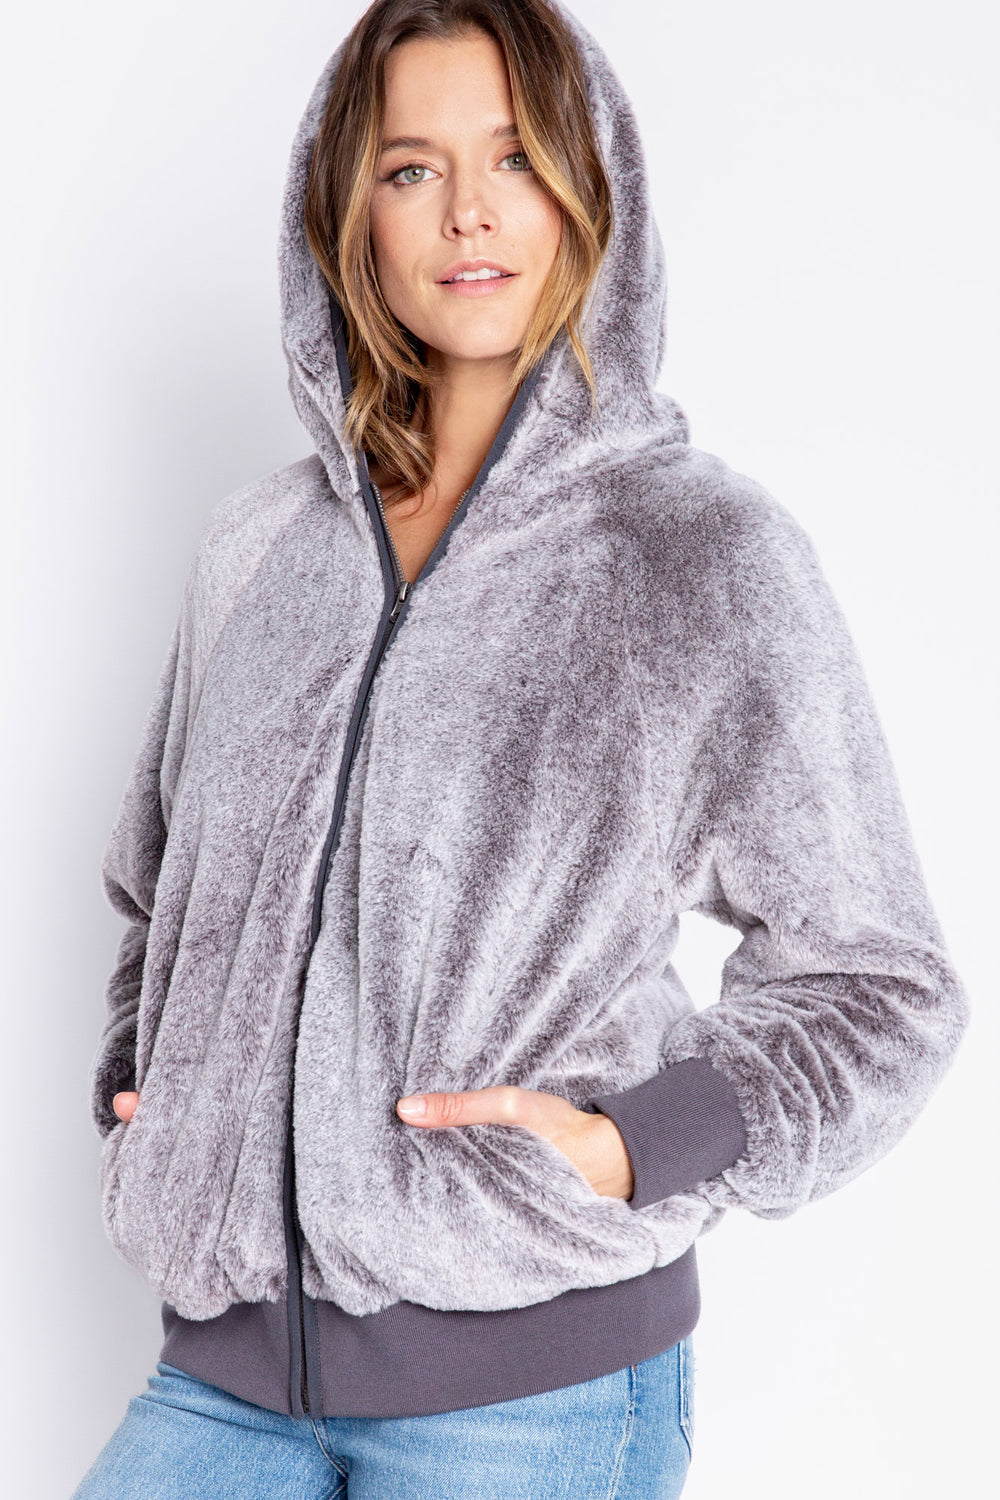 Charcoal grey faux fur zip-up jacket with hood. Printed inspirational message on inside lining. (6982897631332)